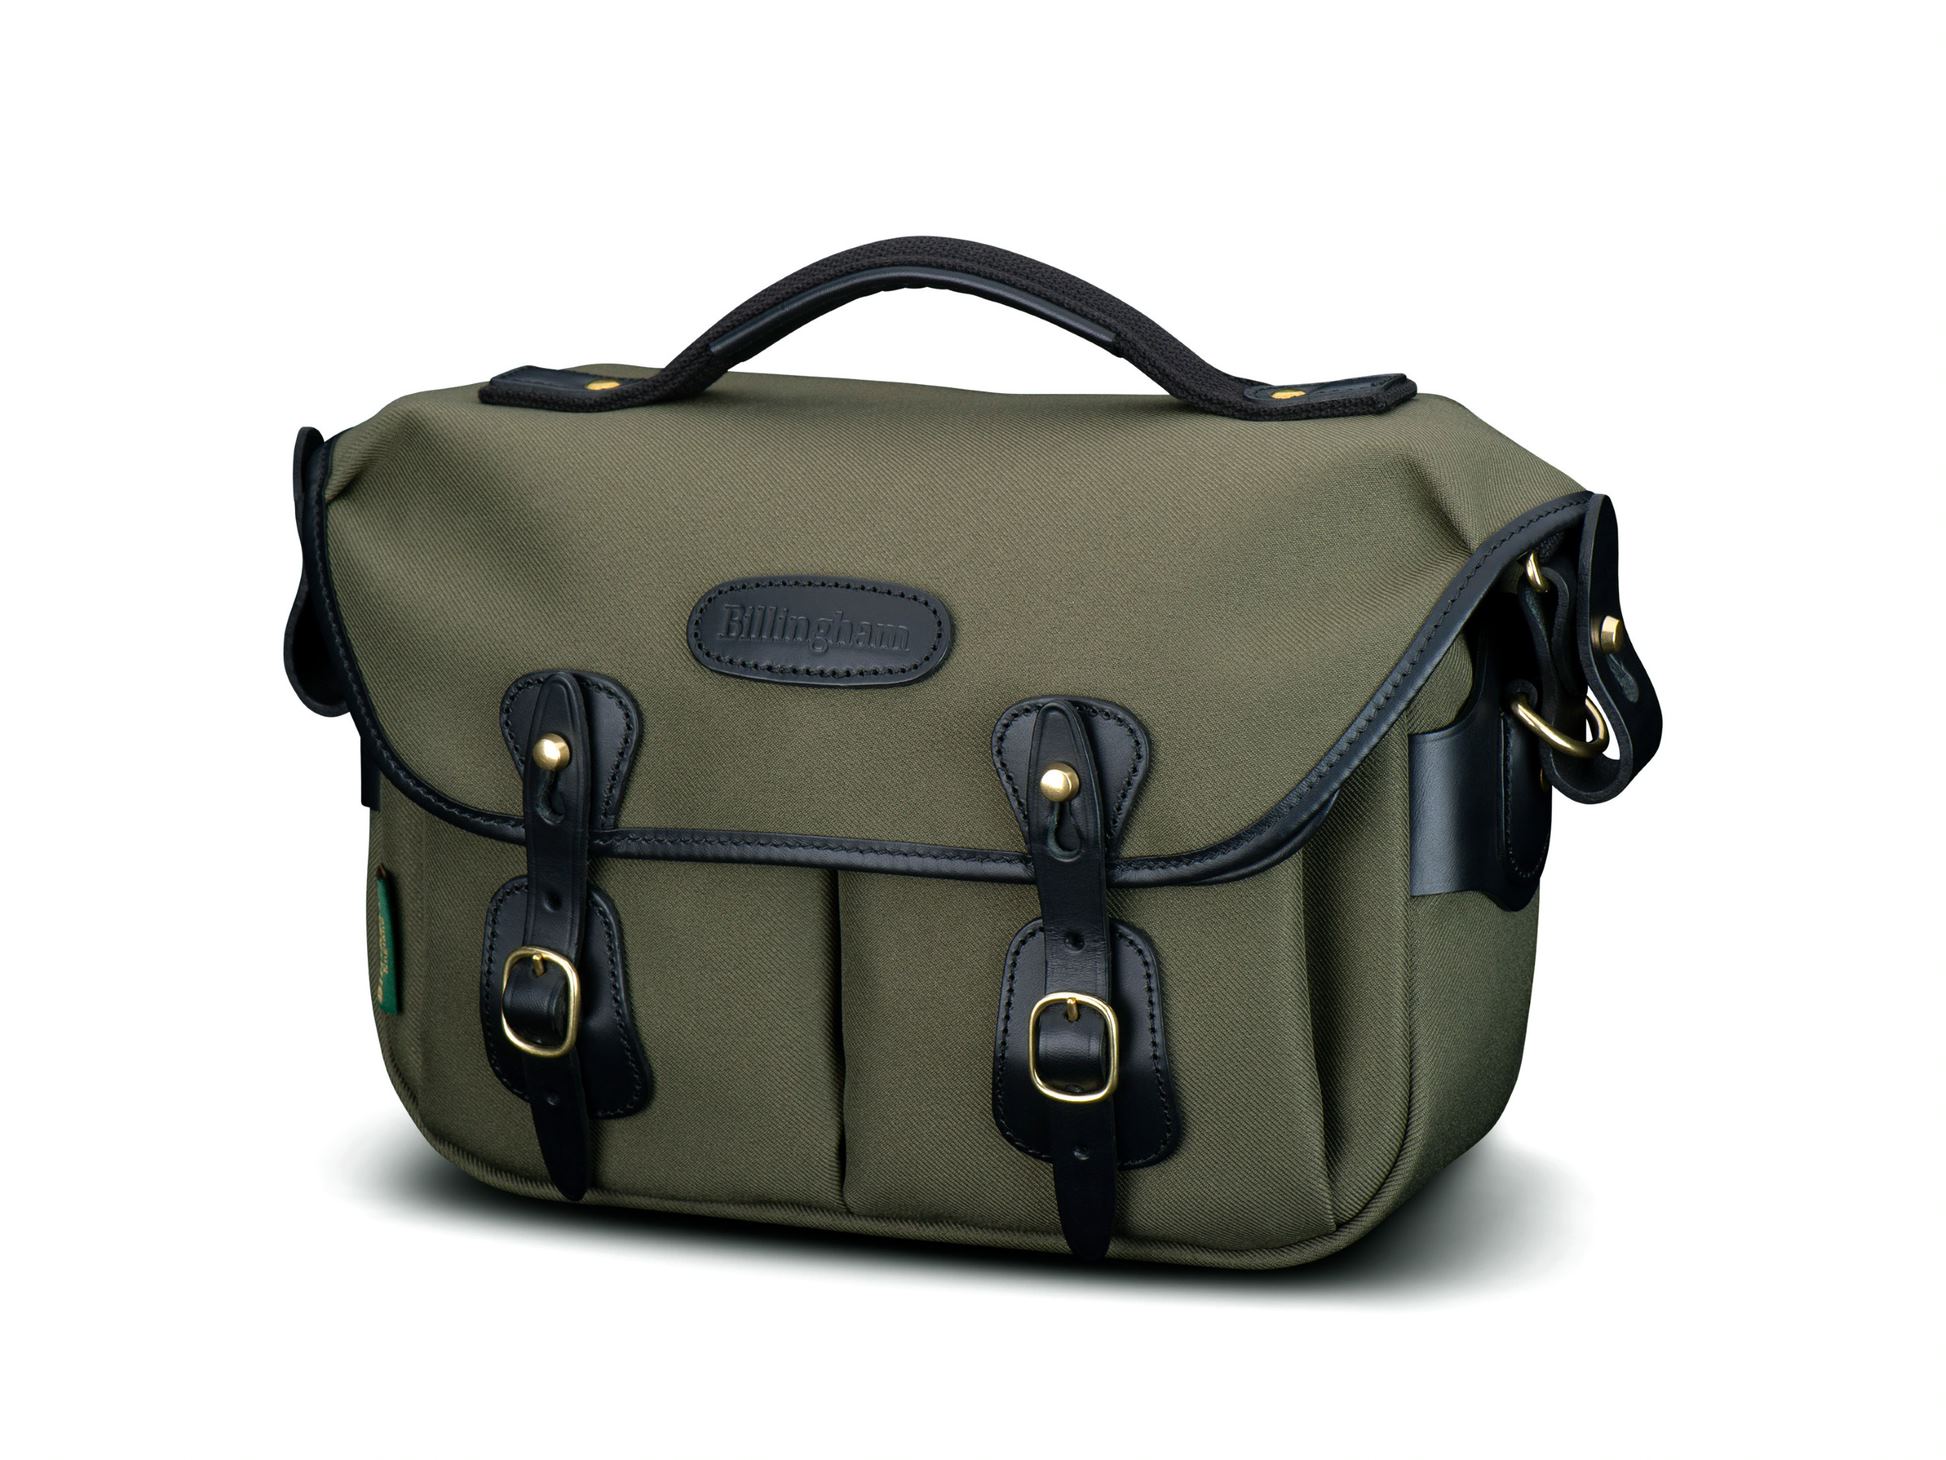 Billingham's Hadley Small Pro in the new sage/black combination. A wide range of Billingham's most popular bags also comes in this new and attractive colour.